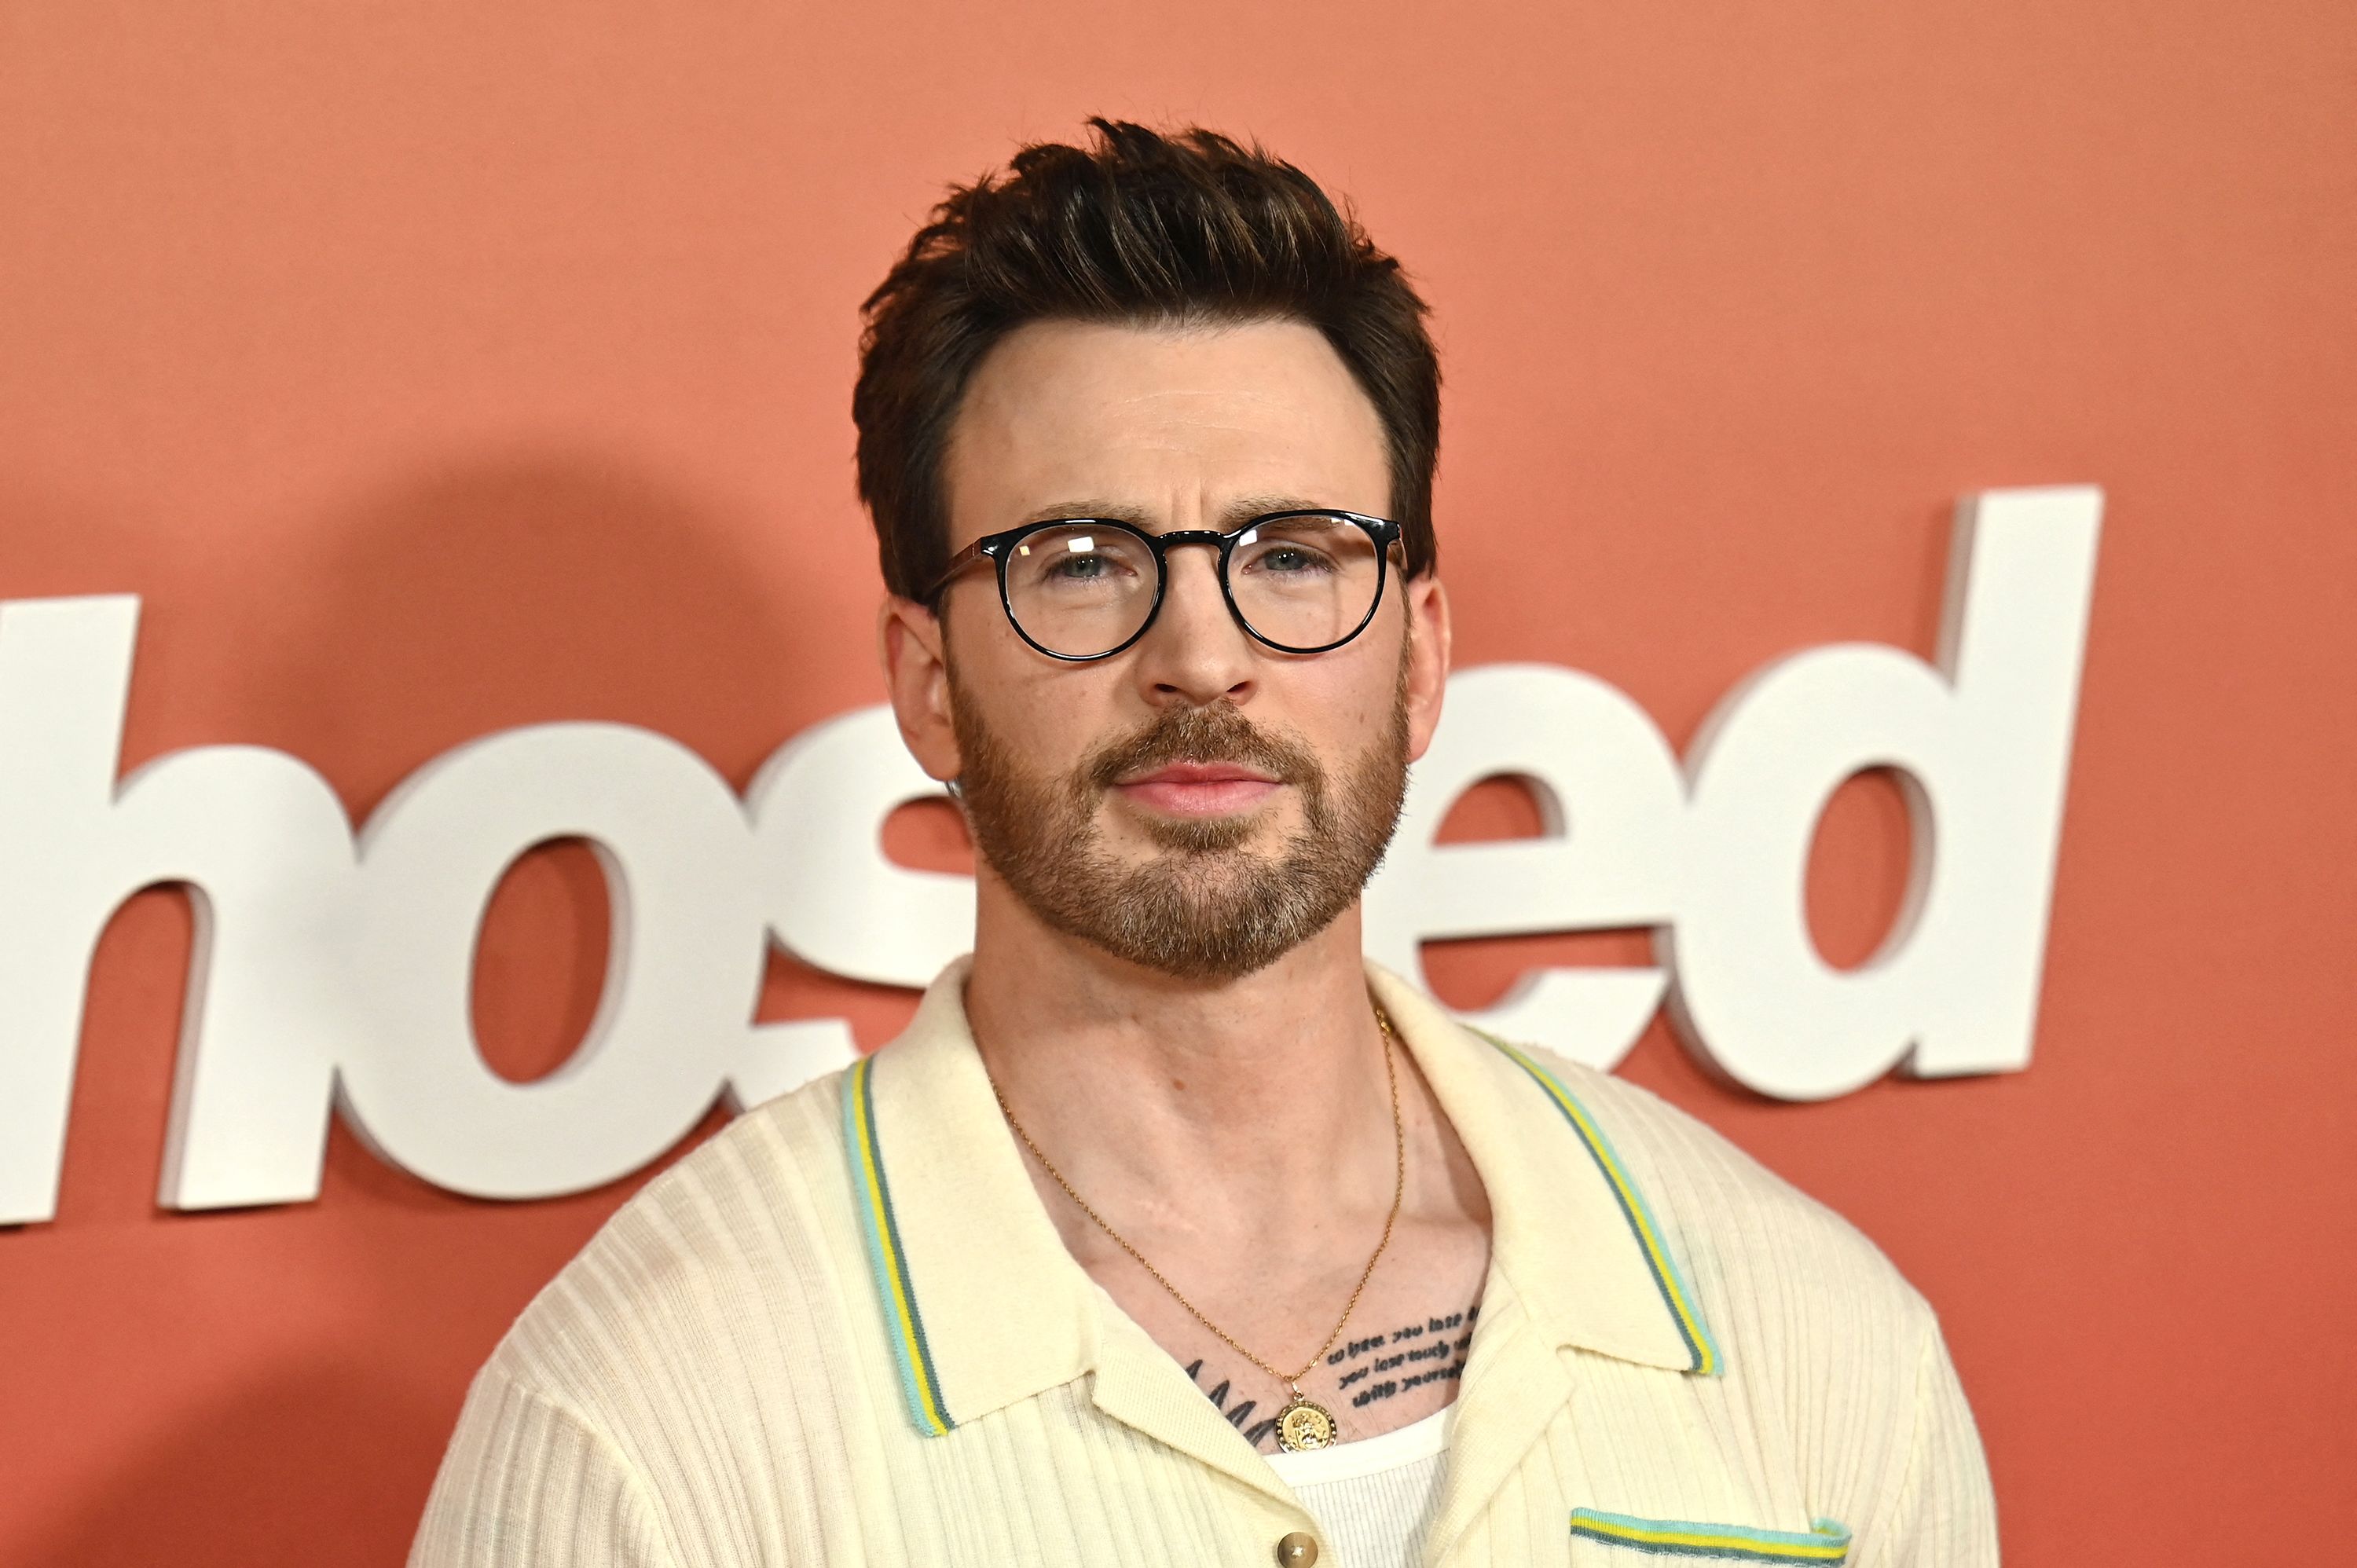 Chris Evans says he too has been ghosted | CNN